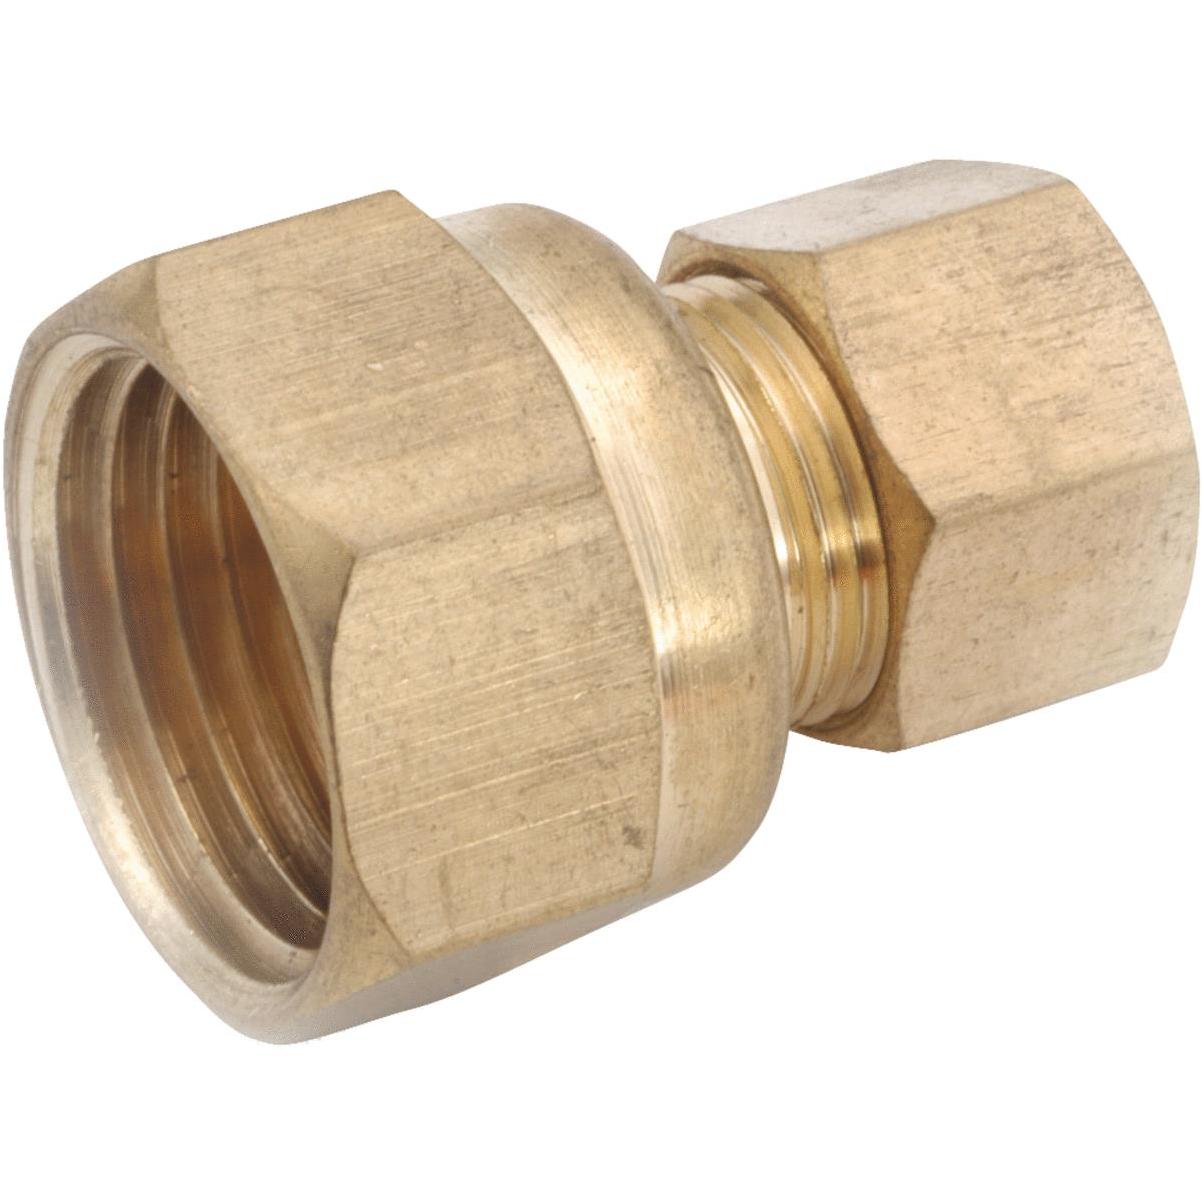 Brass 3/8-in COMP x 3/8-in COMP Adapter Tee